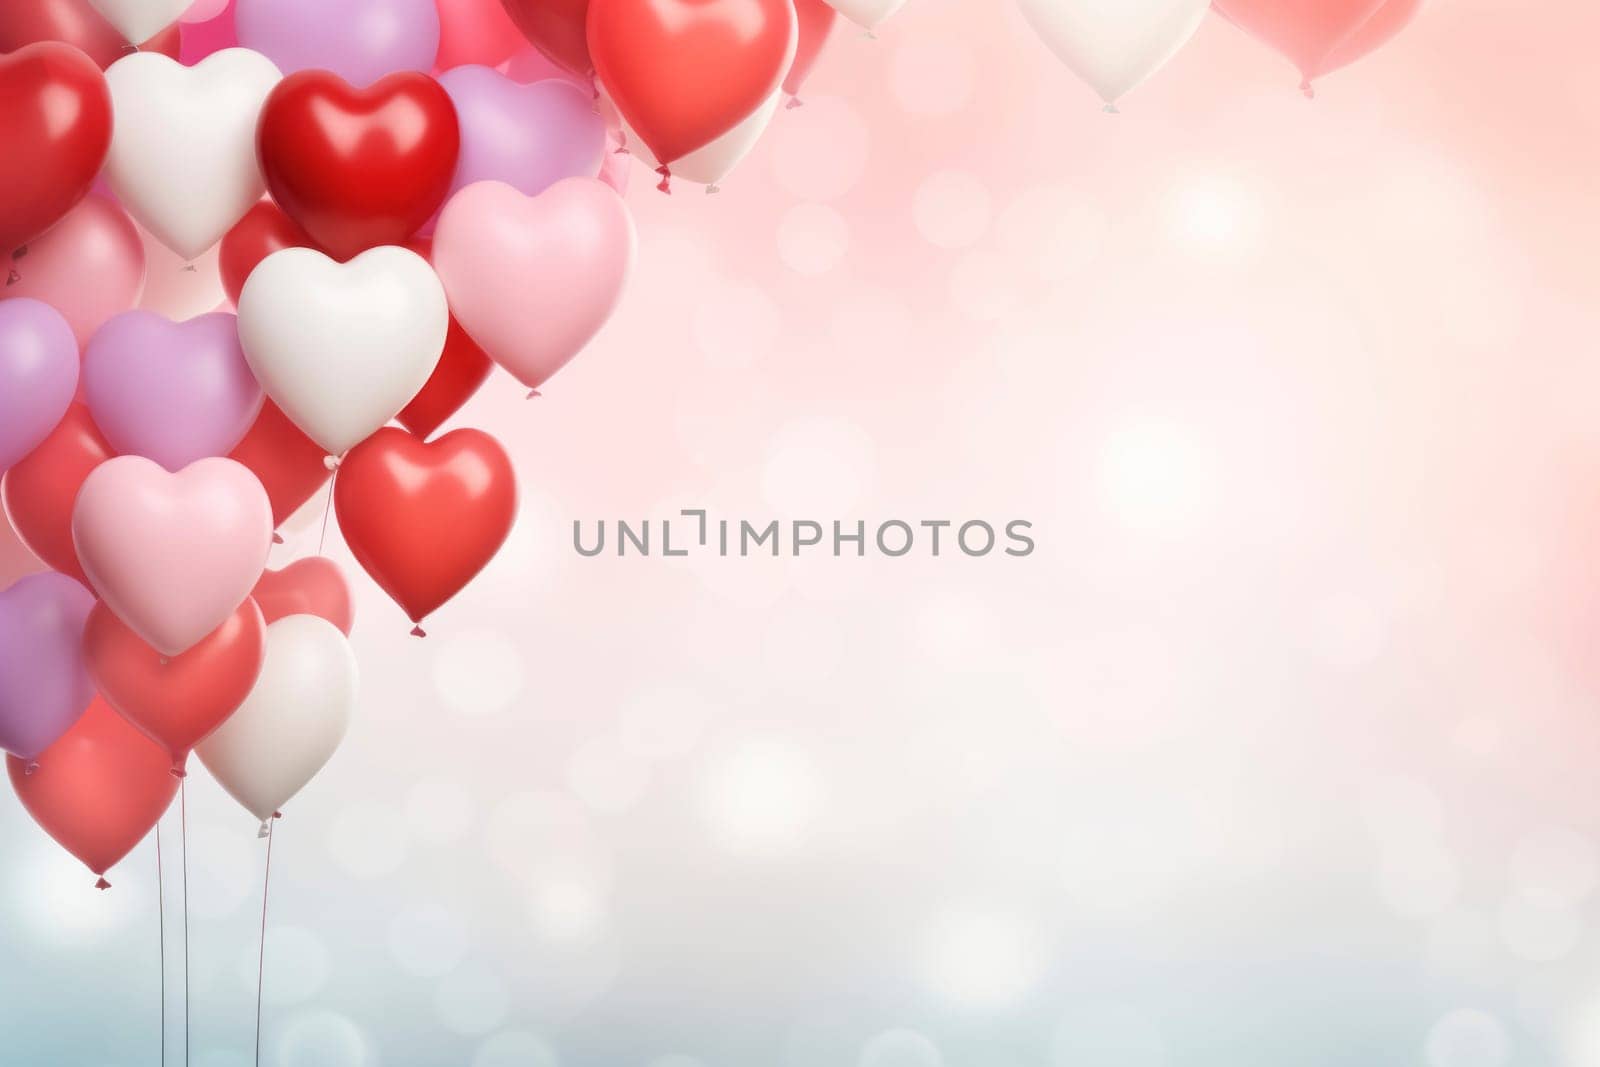 Heart-Shaped Balloons on Pastel Background by andreyz